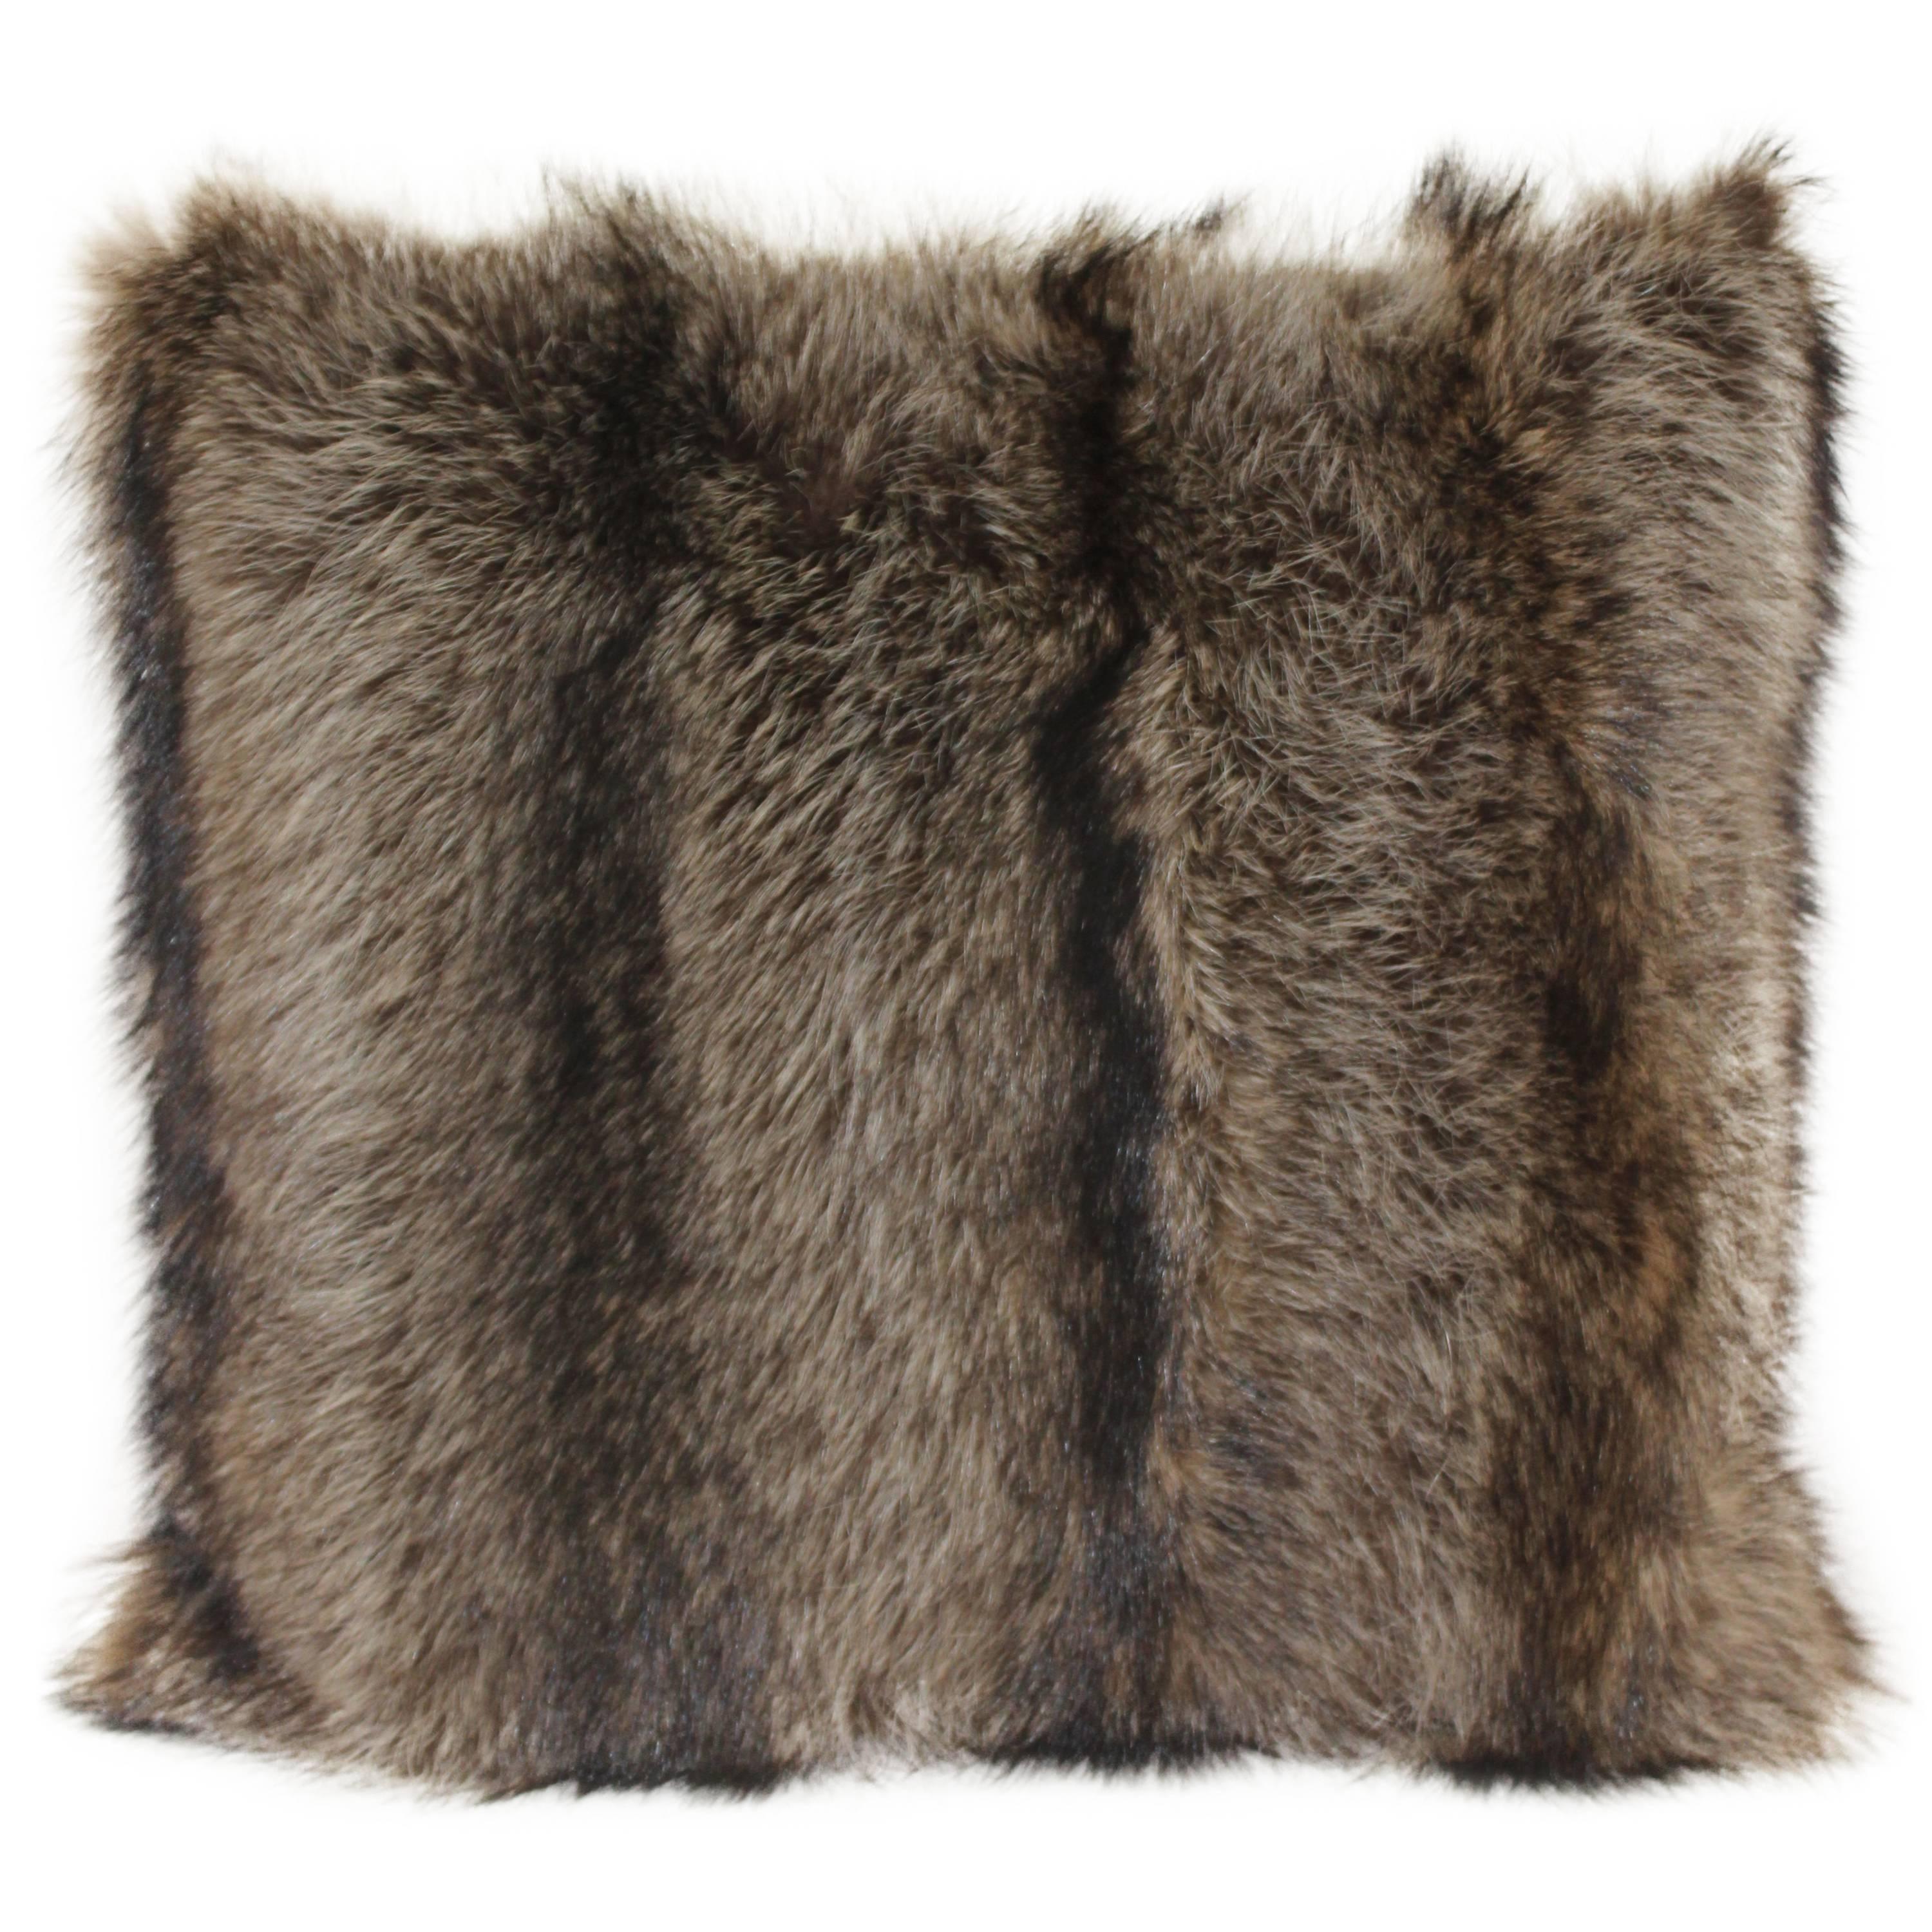 Luxurious Down Filled Genuine Raccoon Throw Pillows For Sale